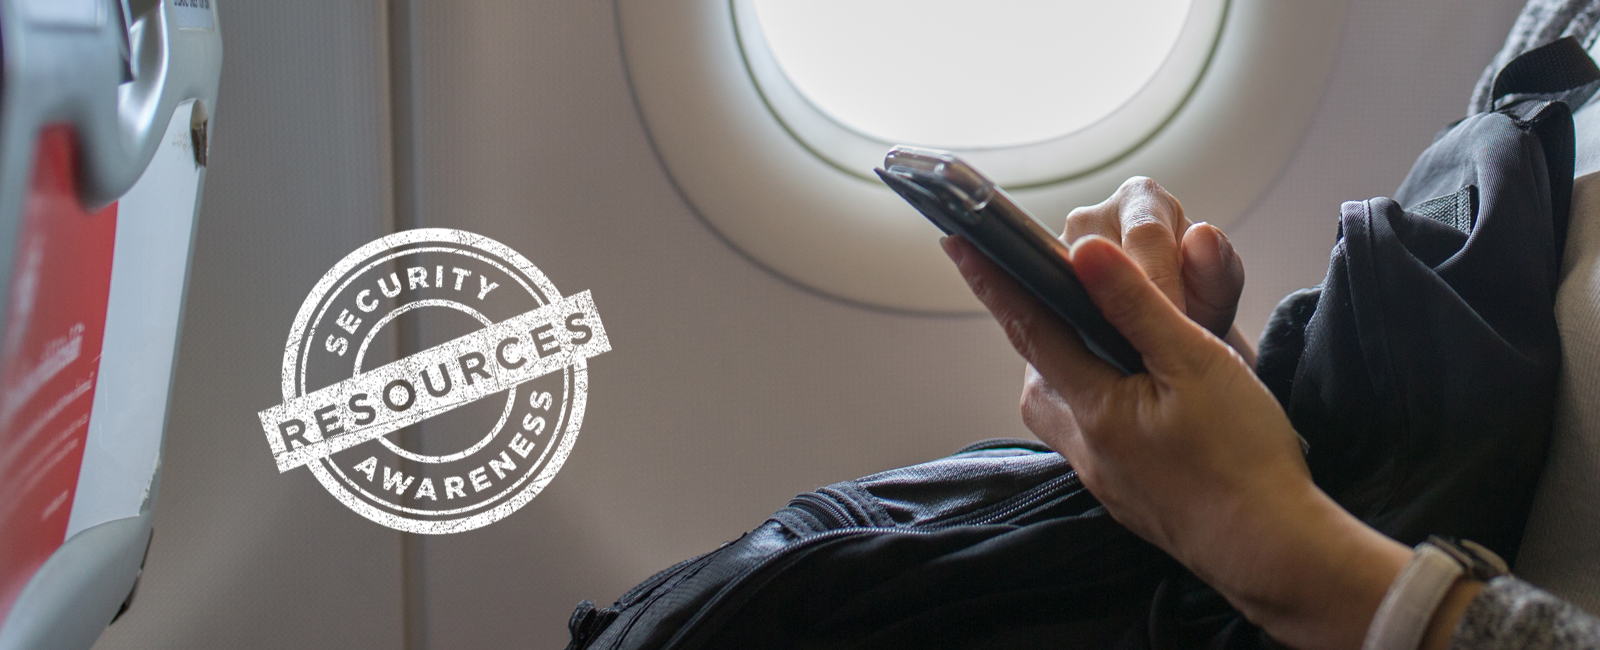 photo of person on airplane using mobile device